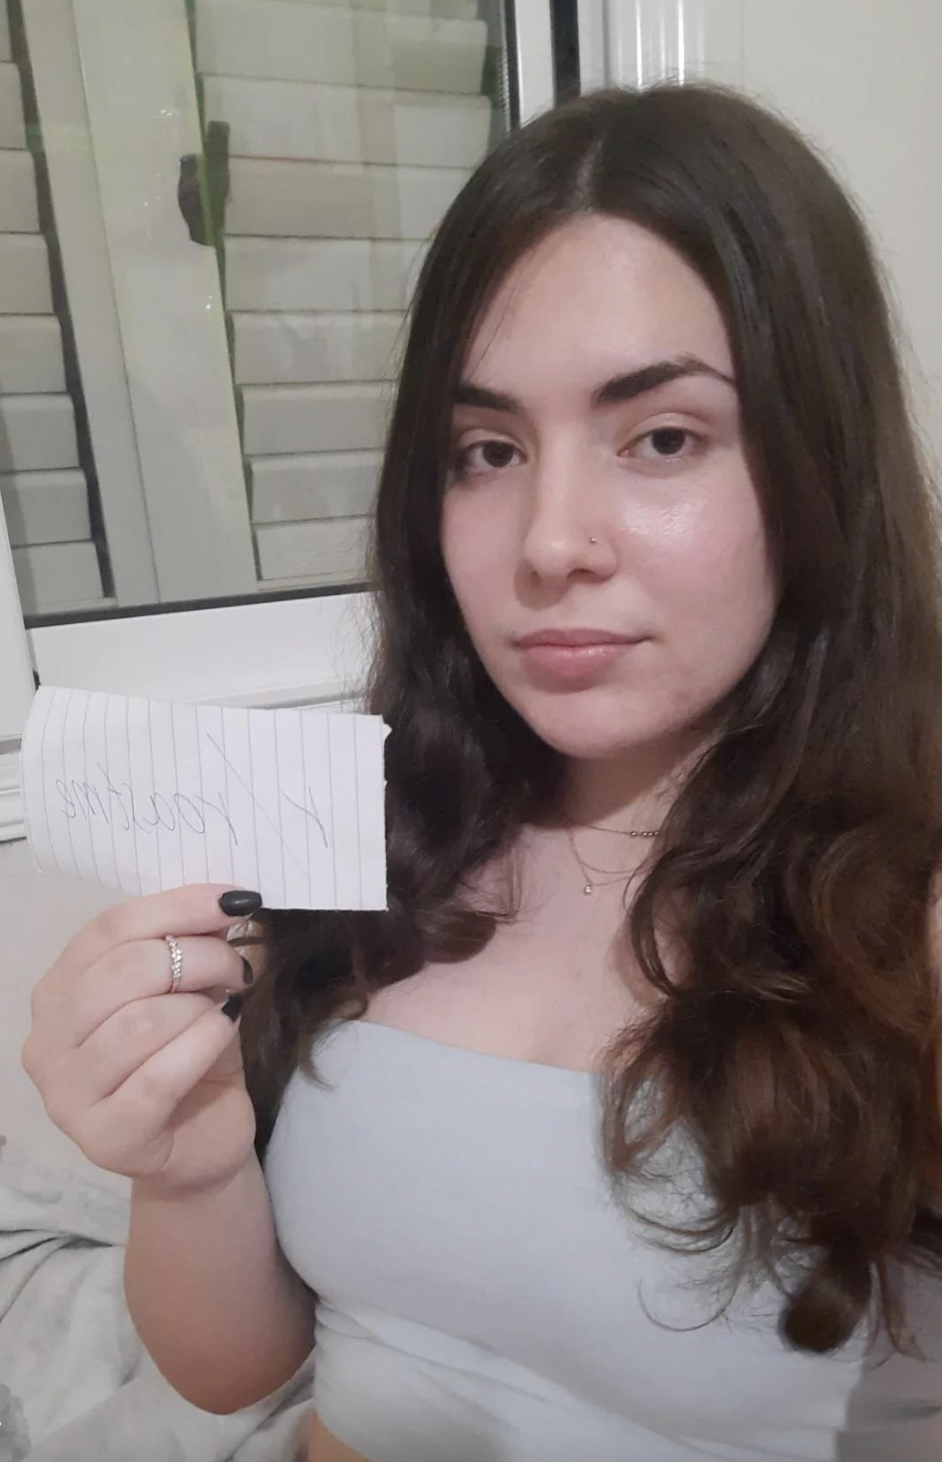 Haven't slept well in a while, so roast me!